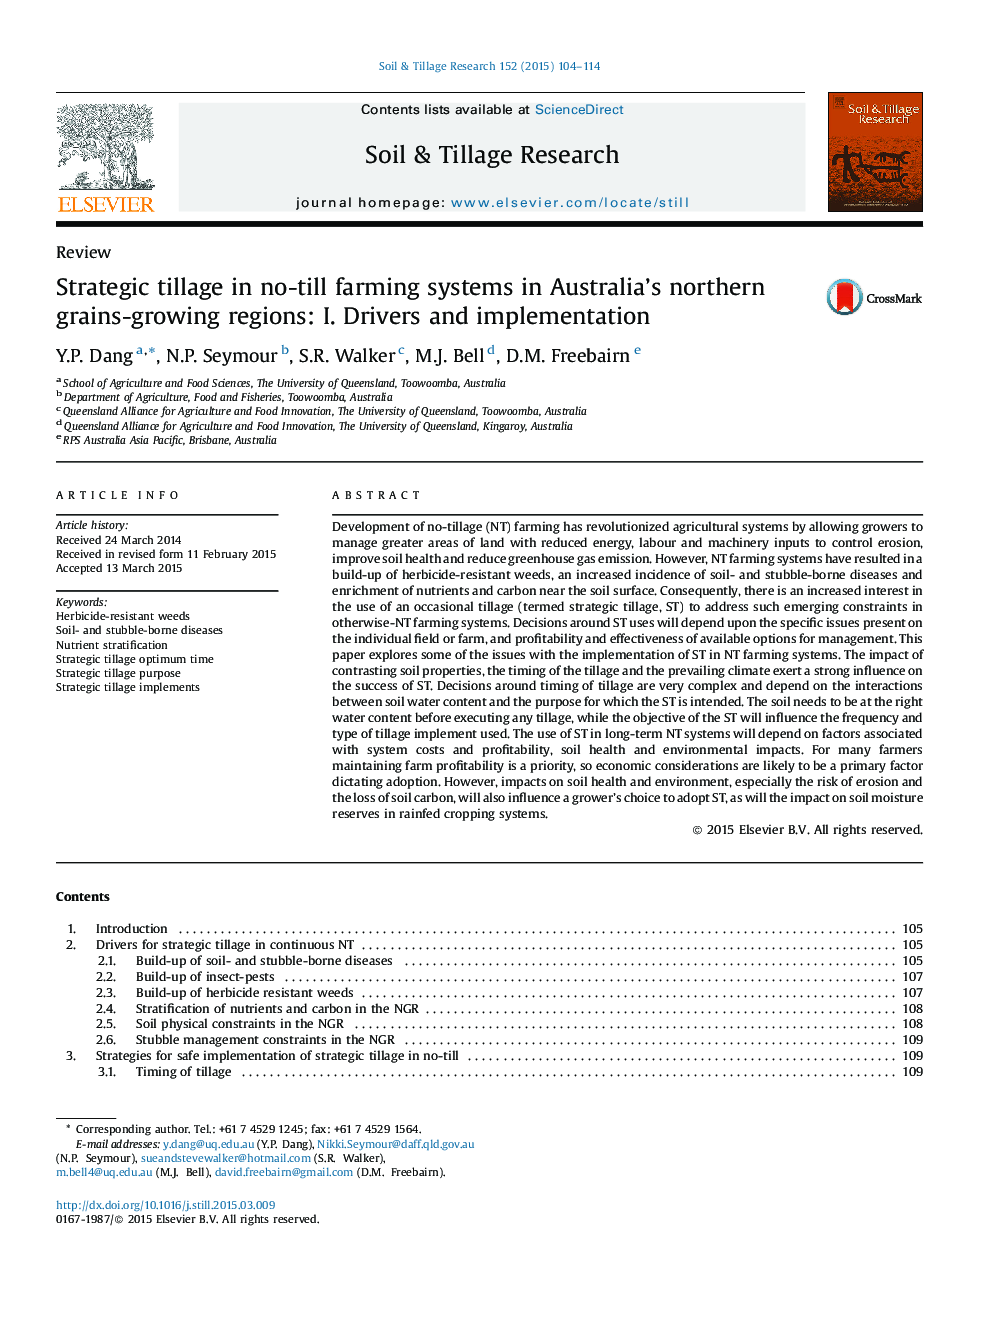 Strategic tillage in no-till farming systems in Australia’s northern grains-growing regions: I. Drivers and implementation